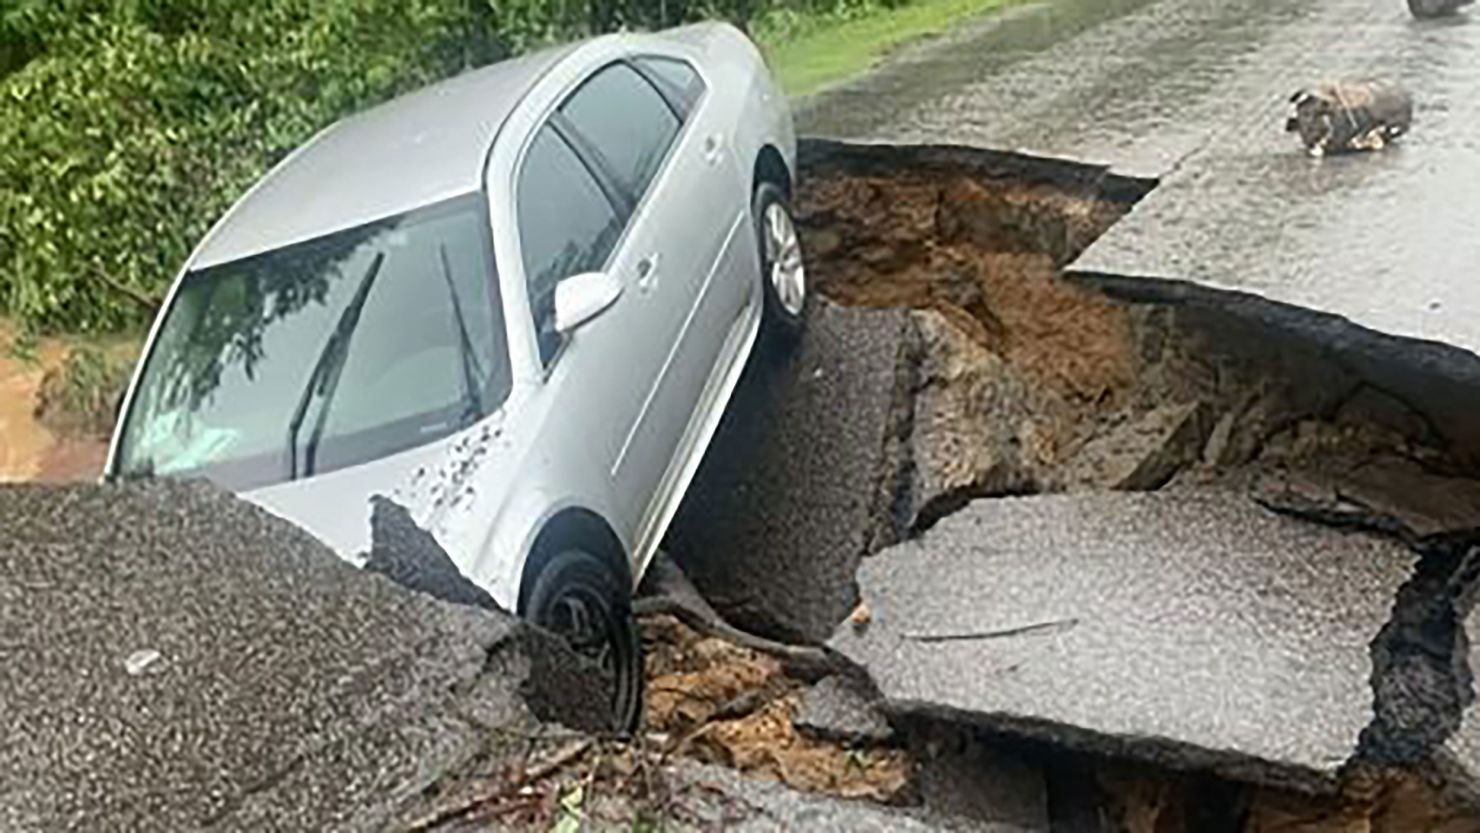 This road in Graves County, Kentucky, was washed out by Wednesday's flooding, the sheriff's office said.